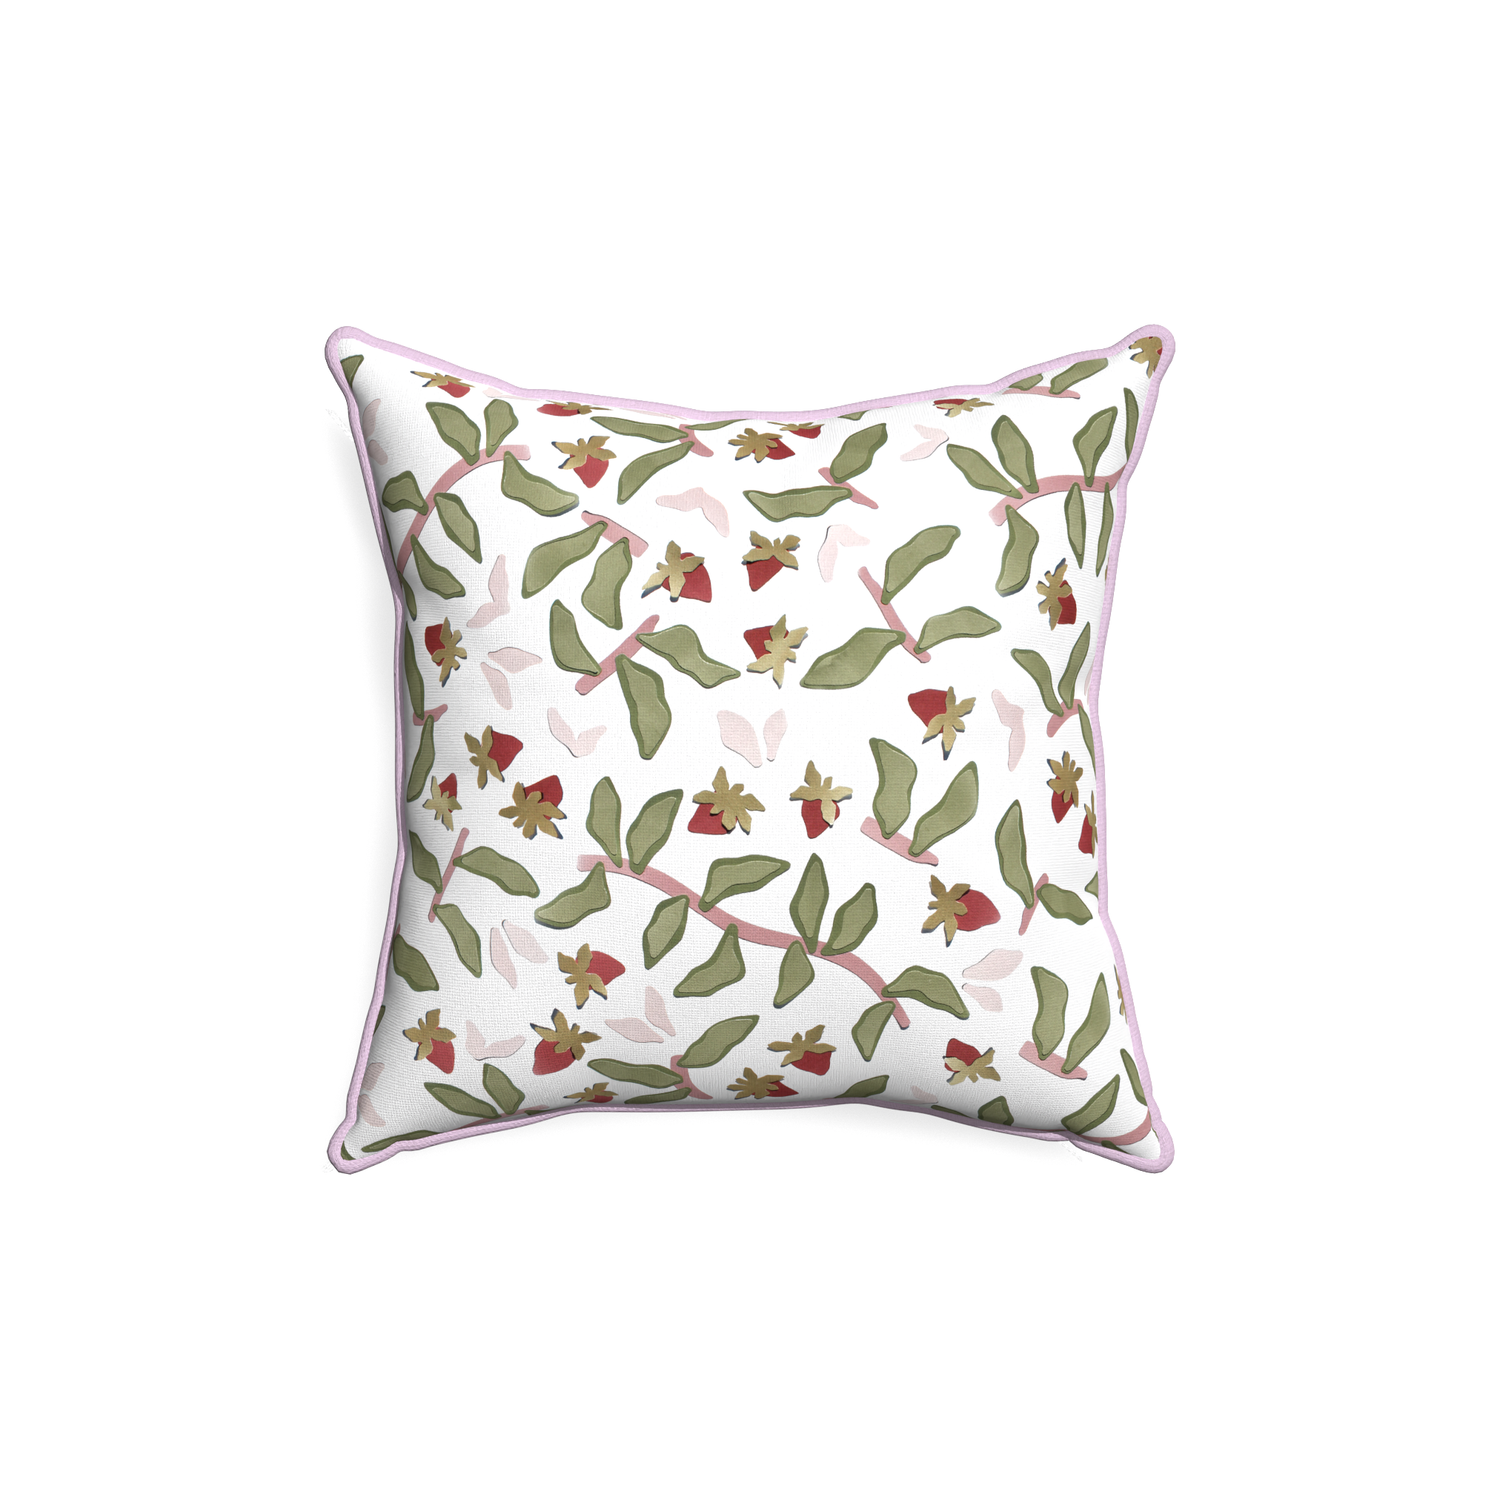 18-square nellie custom strawberry & botanicalpillow with l piping on white background